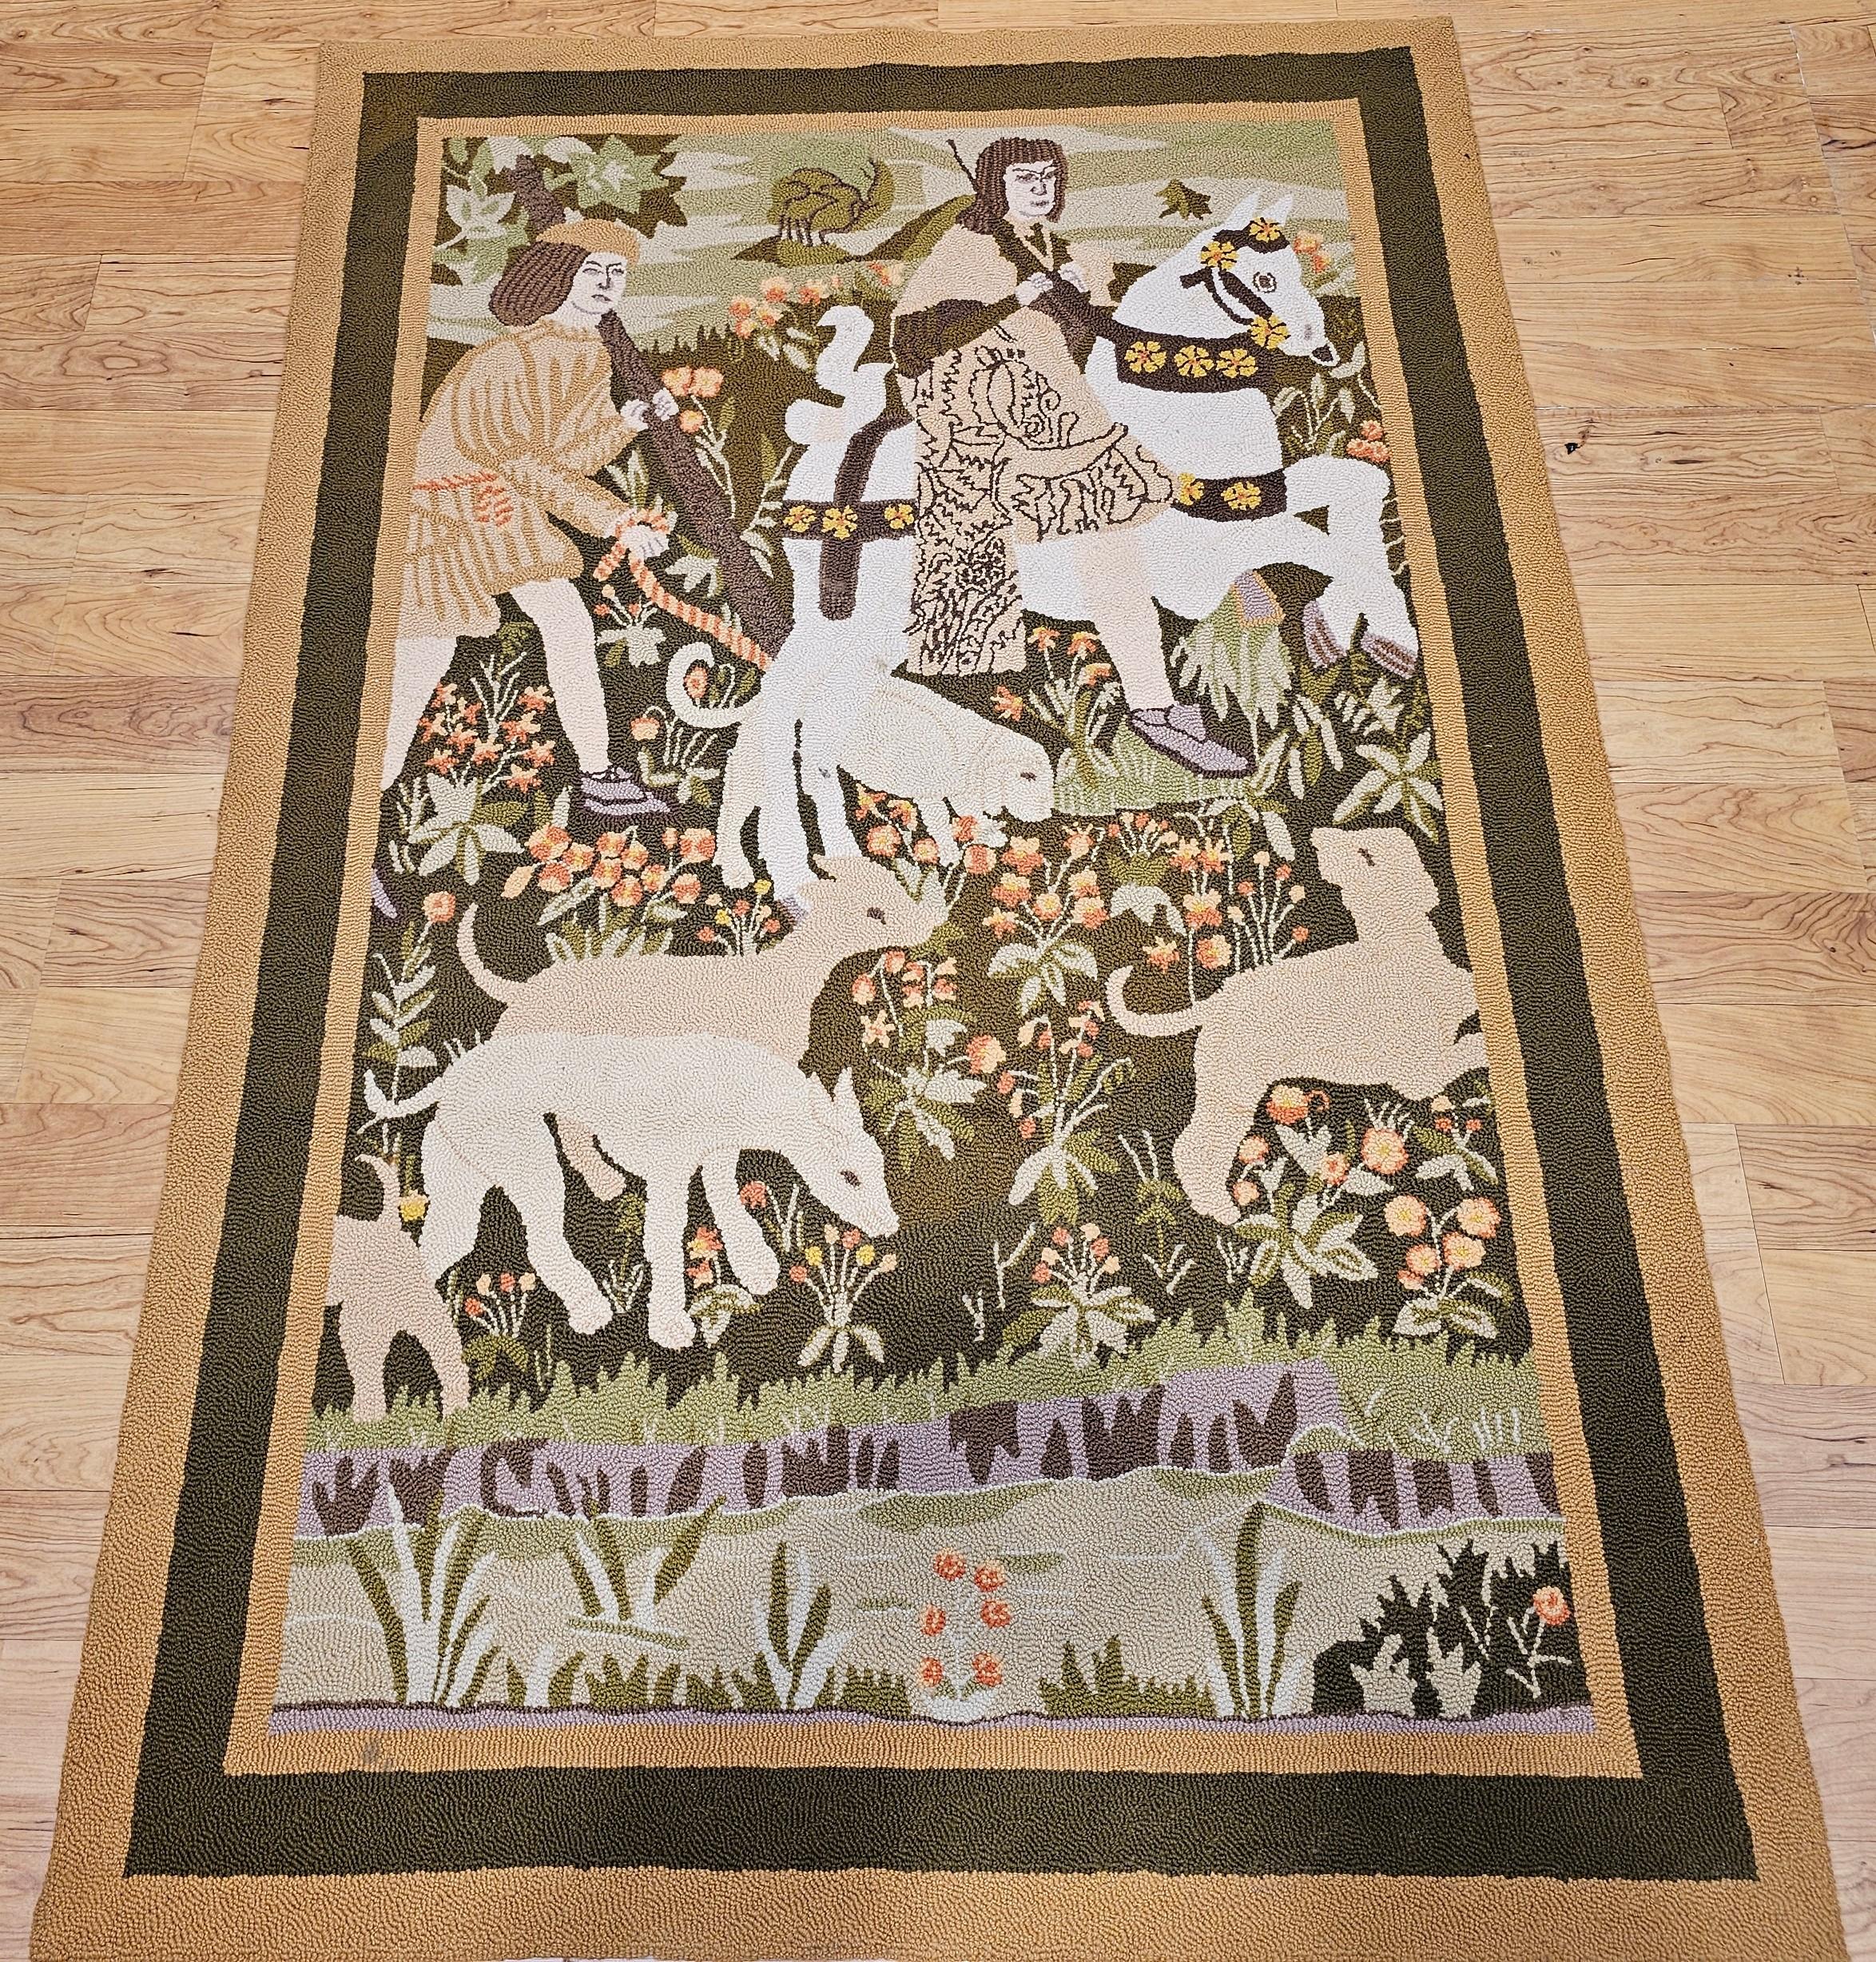  Vintage hand hooked rug in a wonderful depiction of a forest scene with trees and water with men and animals.  The rug has a delightful design and colors including green, ivory, lavender, brown, and yellow.    We are intrigued with the novelty and